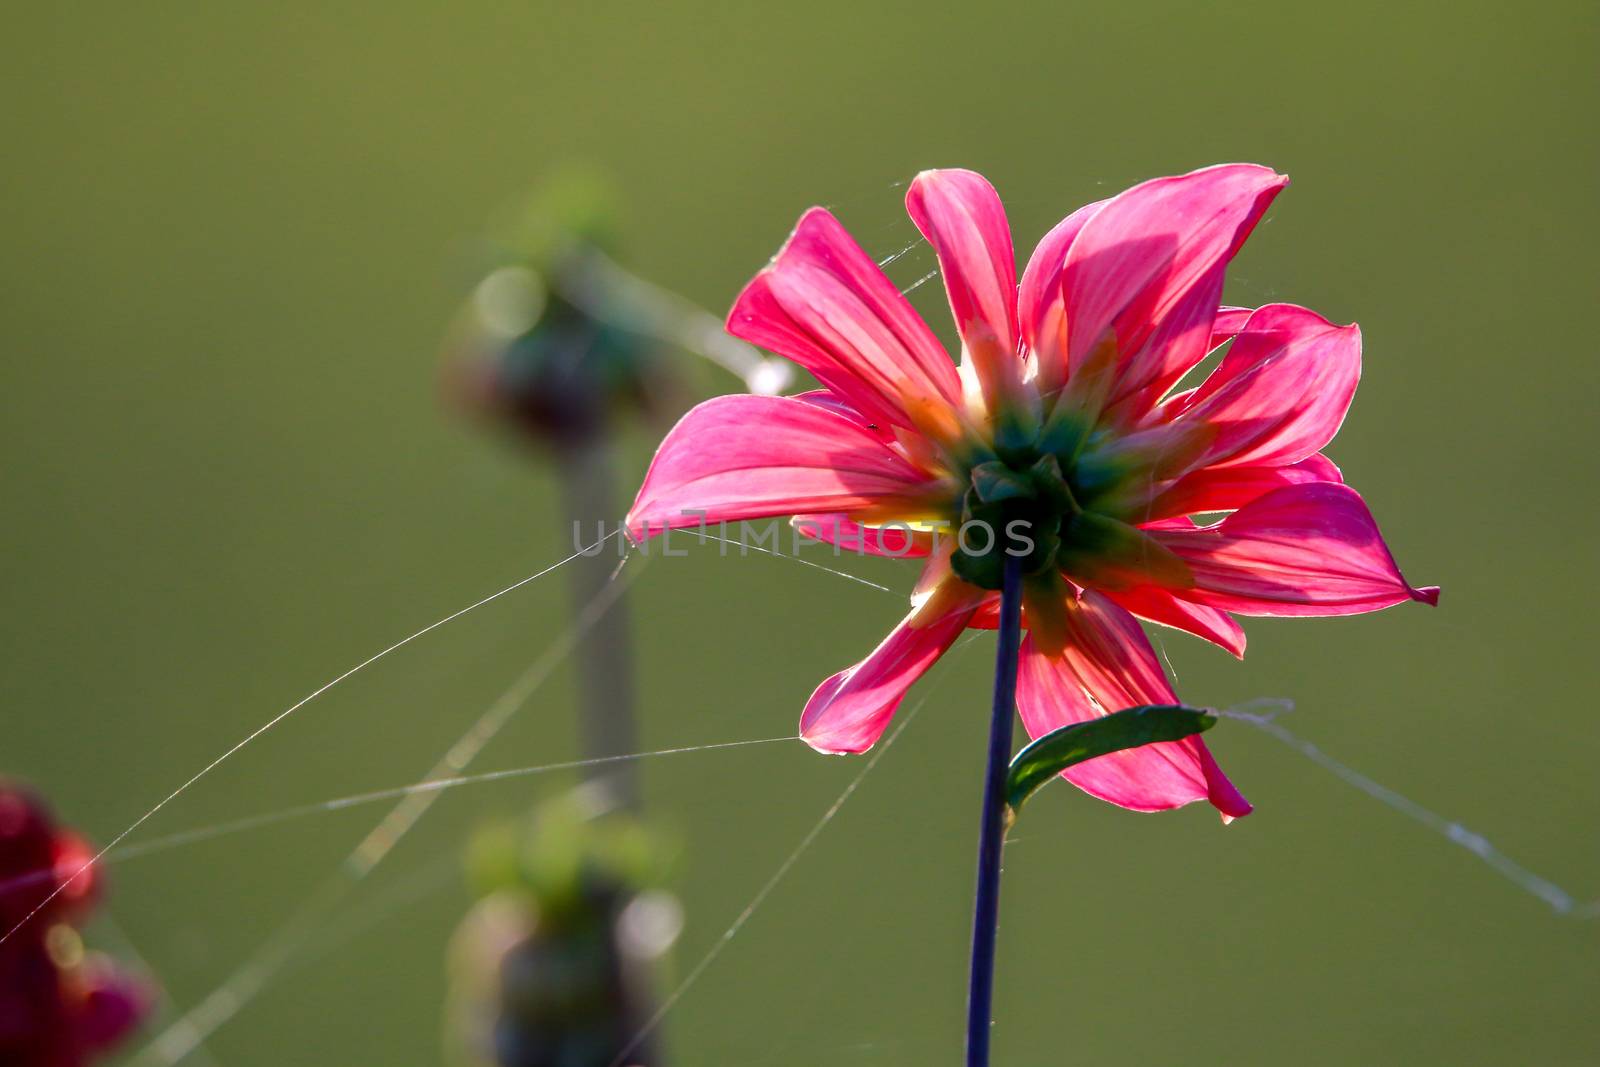 Red dahlia in green meadow. Background with pink dahlia and spider web. Dahlia is mexican plant of the daisy family, which is cultivated for its brightly colored single or double flowers.

